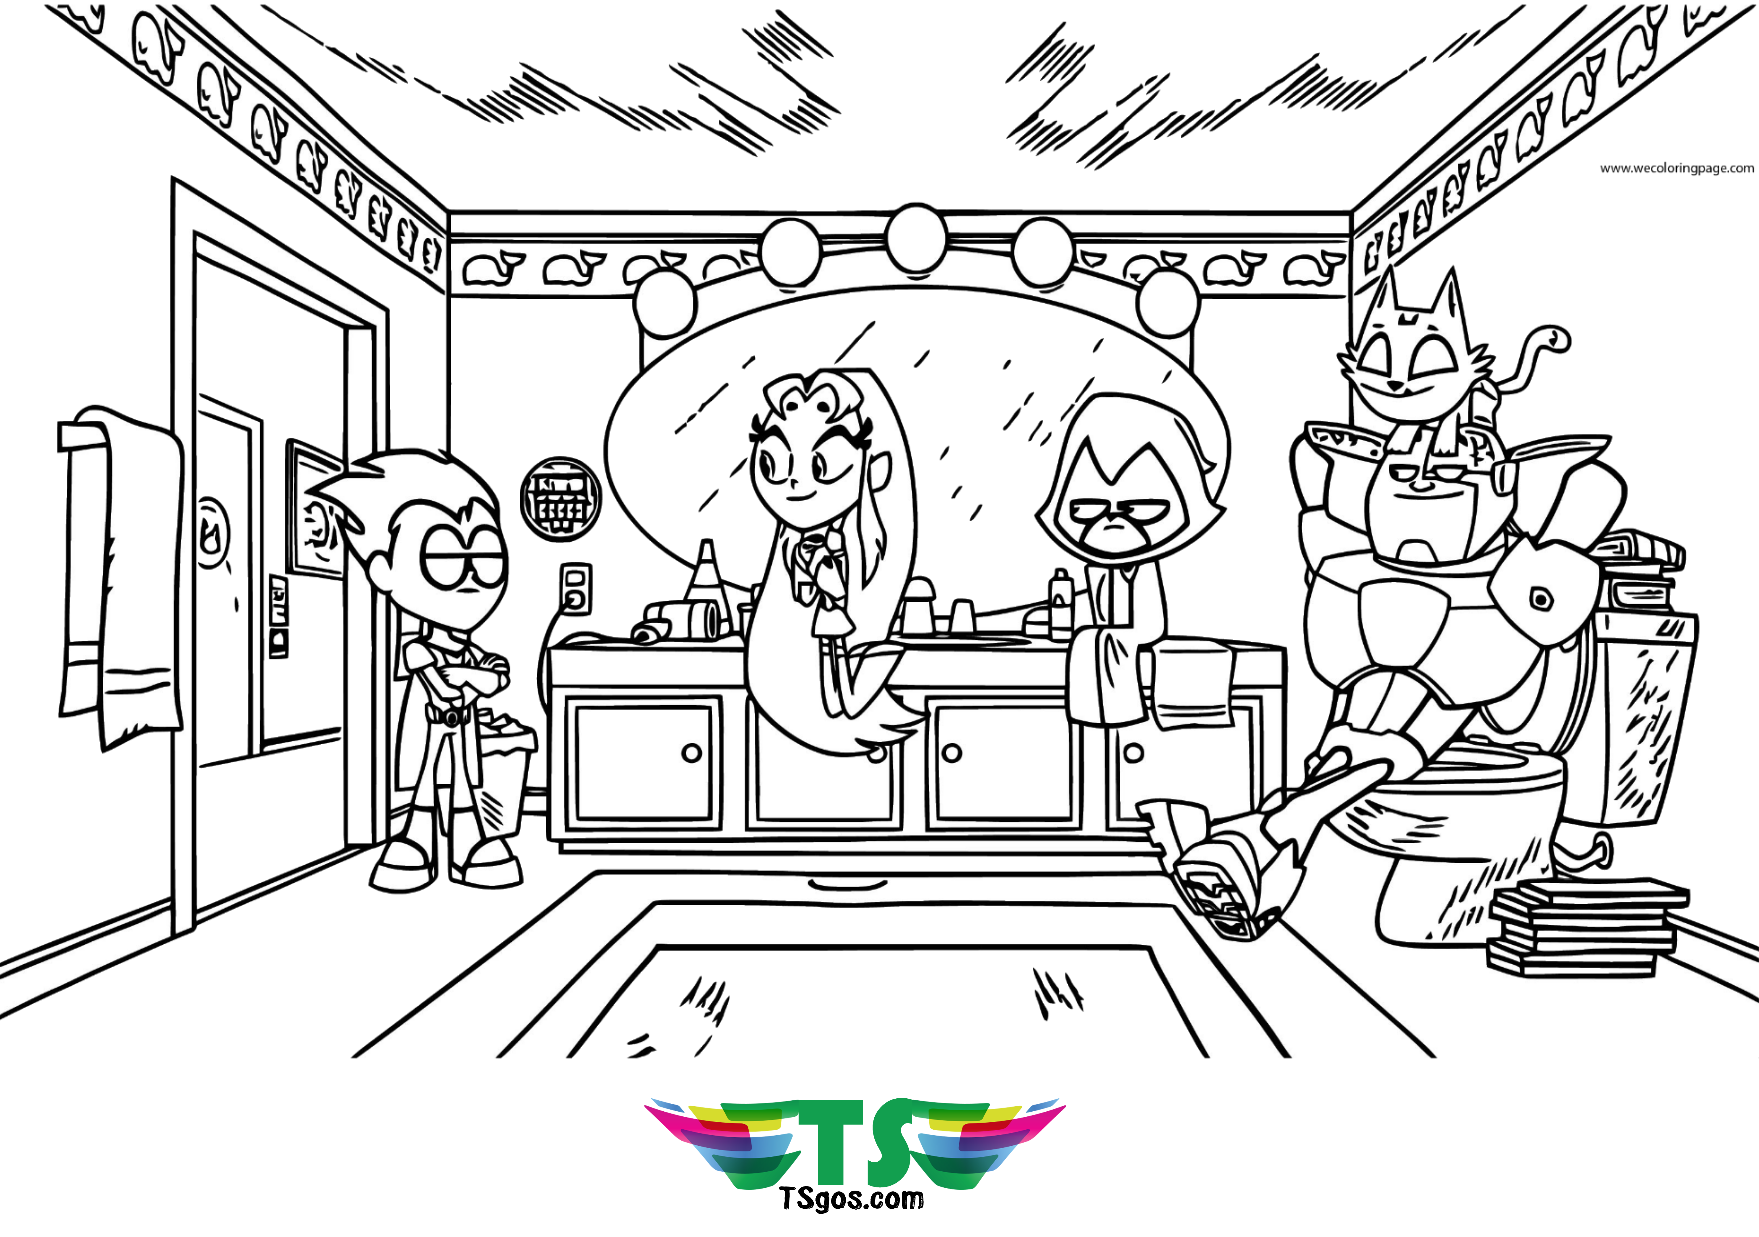 Free Teen Titans coloring page.